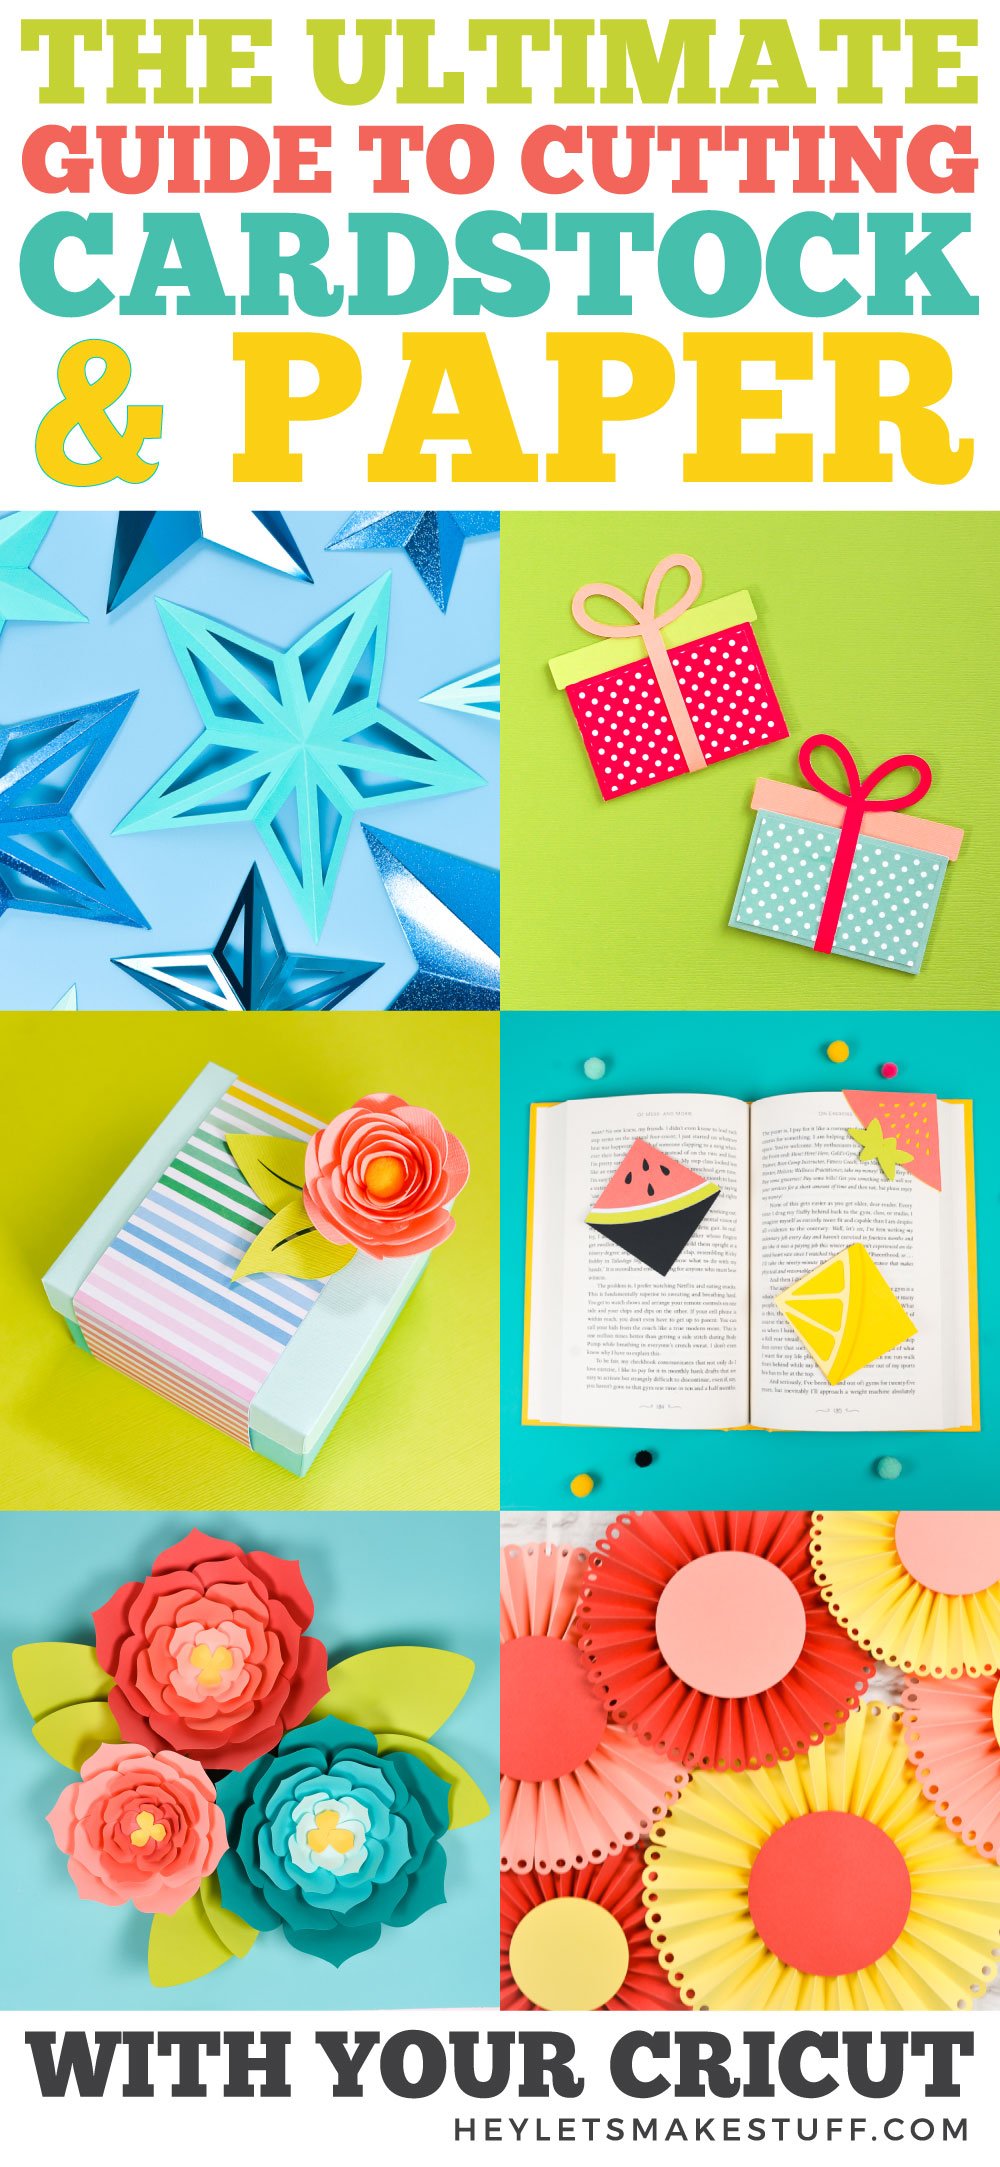 the-ultimate-guide-to-cutting-cardstock-and-paper-with-a-cricut